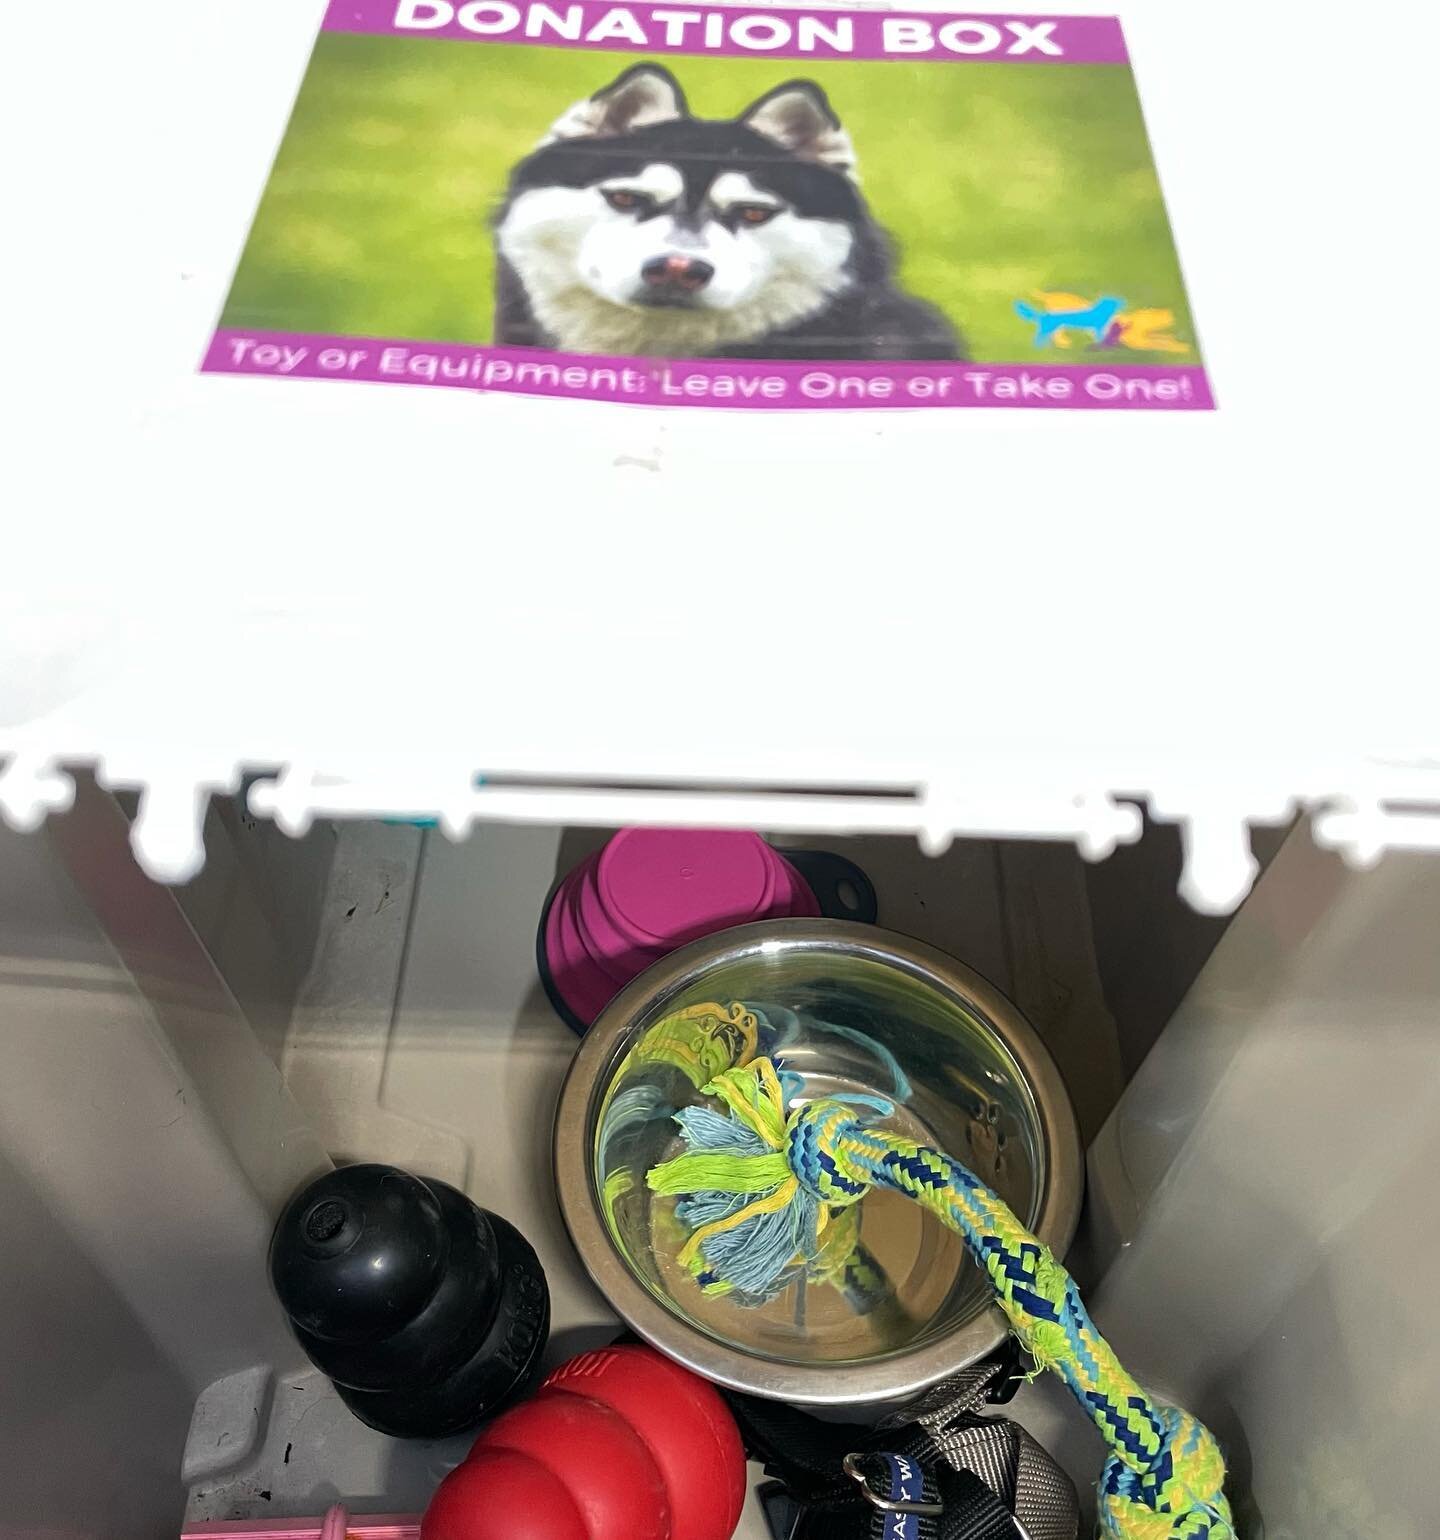 Interested in free dog gear? Wonder Dogs has a donation box where you can leave things your dog doesn&rsquo;t use anymore and swap it out for something new! Come check it out today; it&rsquo;s full of awesome goodies! 
.
.
.
#donation #recycle #reduc